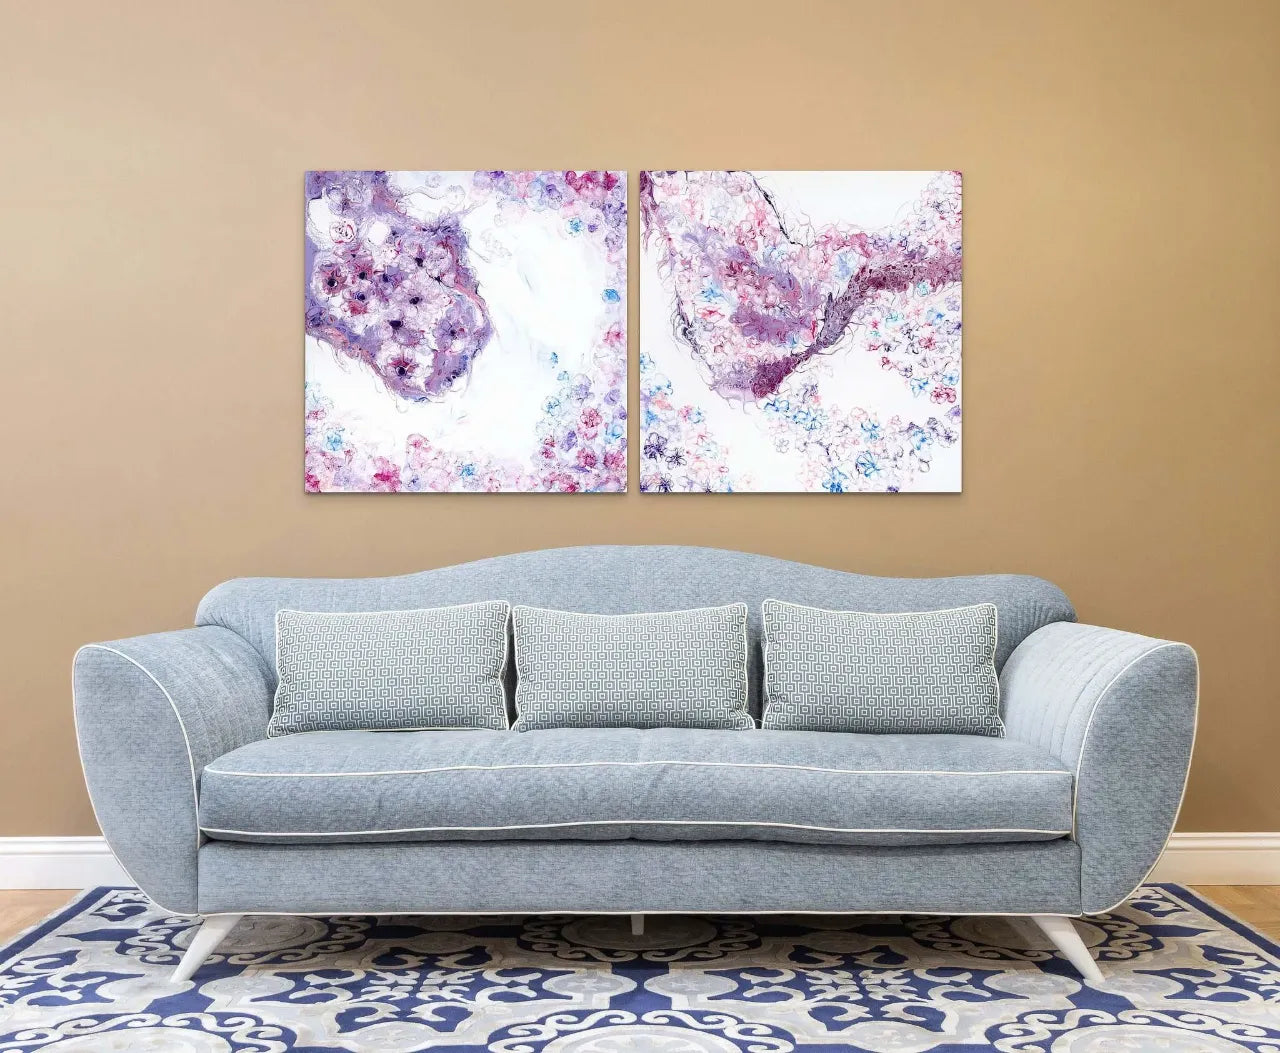 Abstract-Artwork-by-Sung-Lee-Nature-Series-Jacaranda-One-and-Two-Original-Paintings-on-Canvas